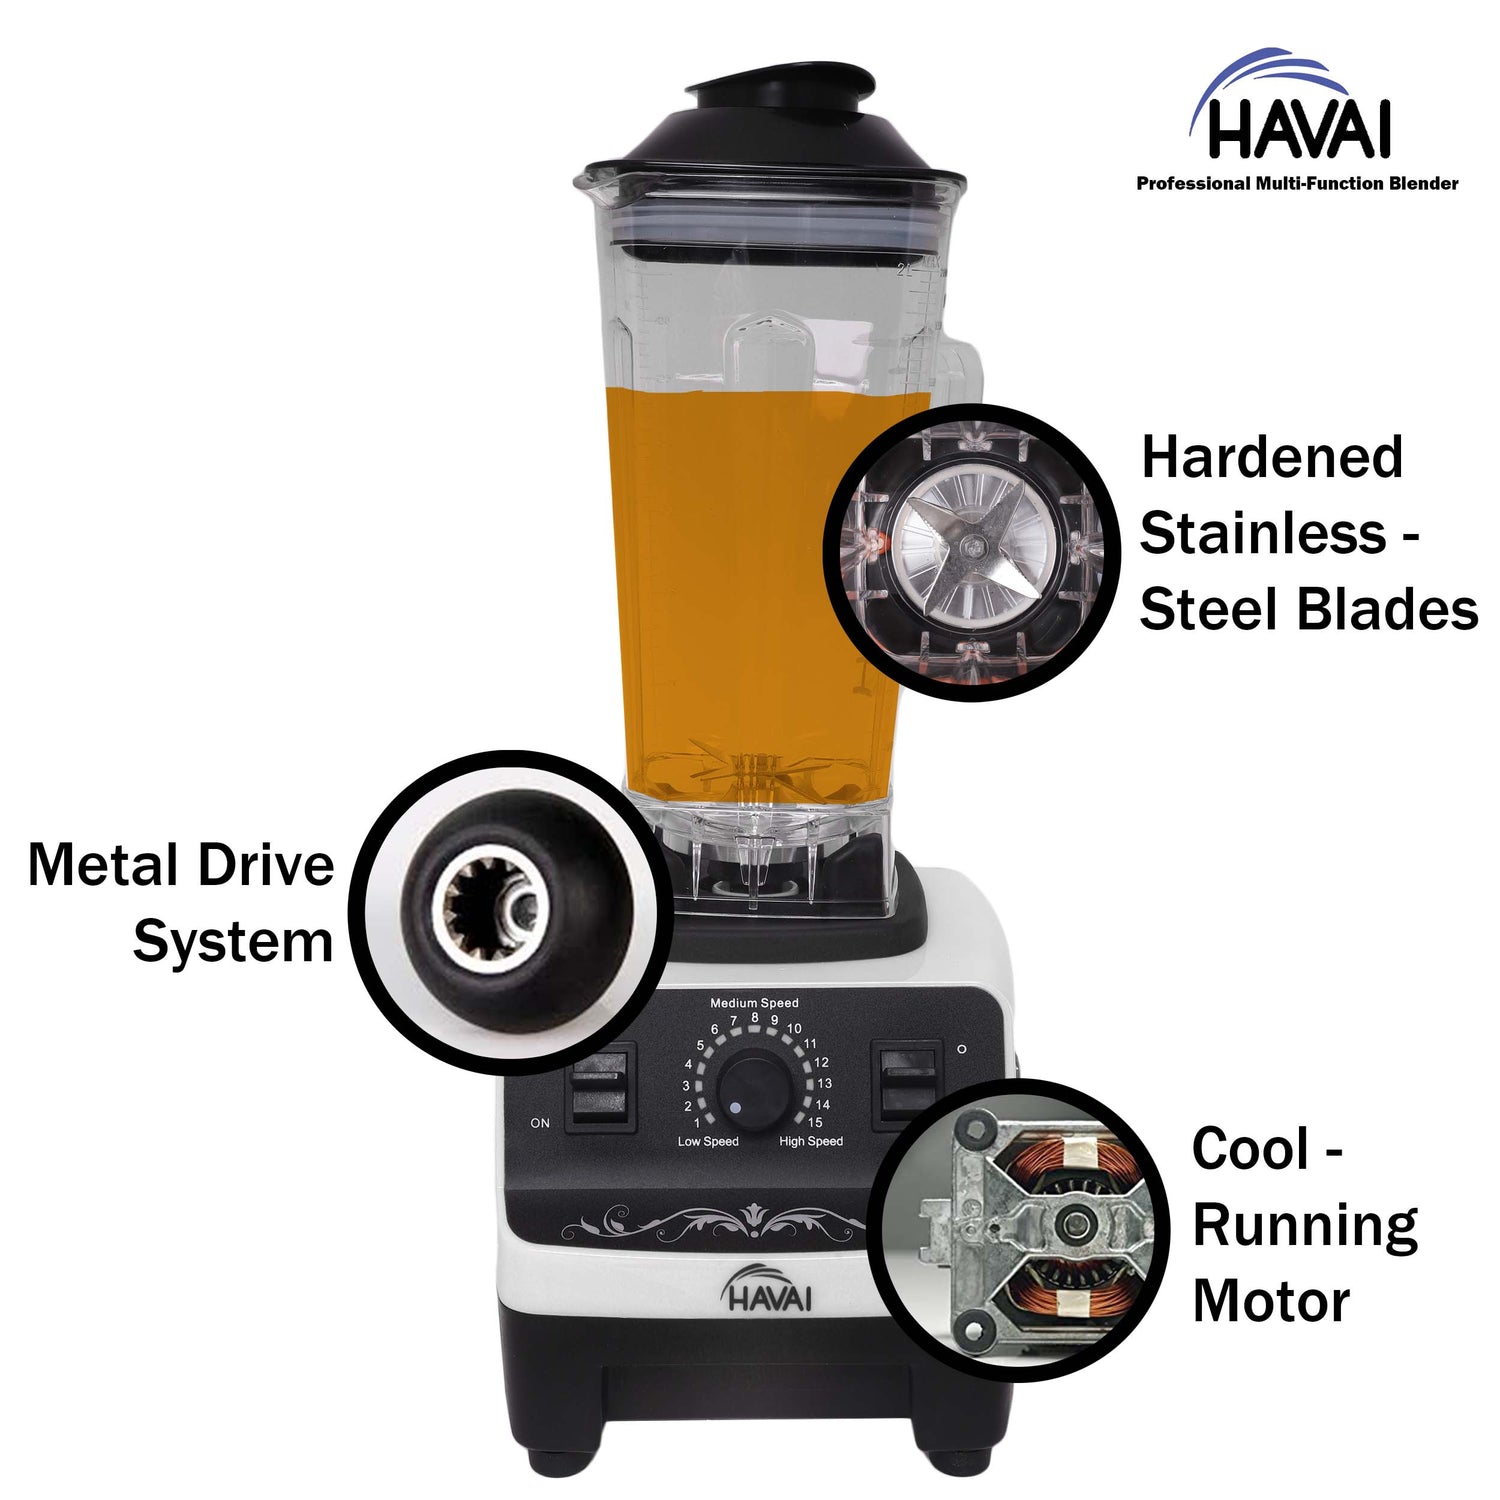 HAVAI Professional Heavy Duty Blender/Grinder/Mixer, 1200W, 2 Litres BPA Free Jar, Crush Ice - Make Shakes, Grind Spices and Smoothies (WHITE)